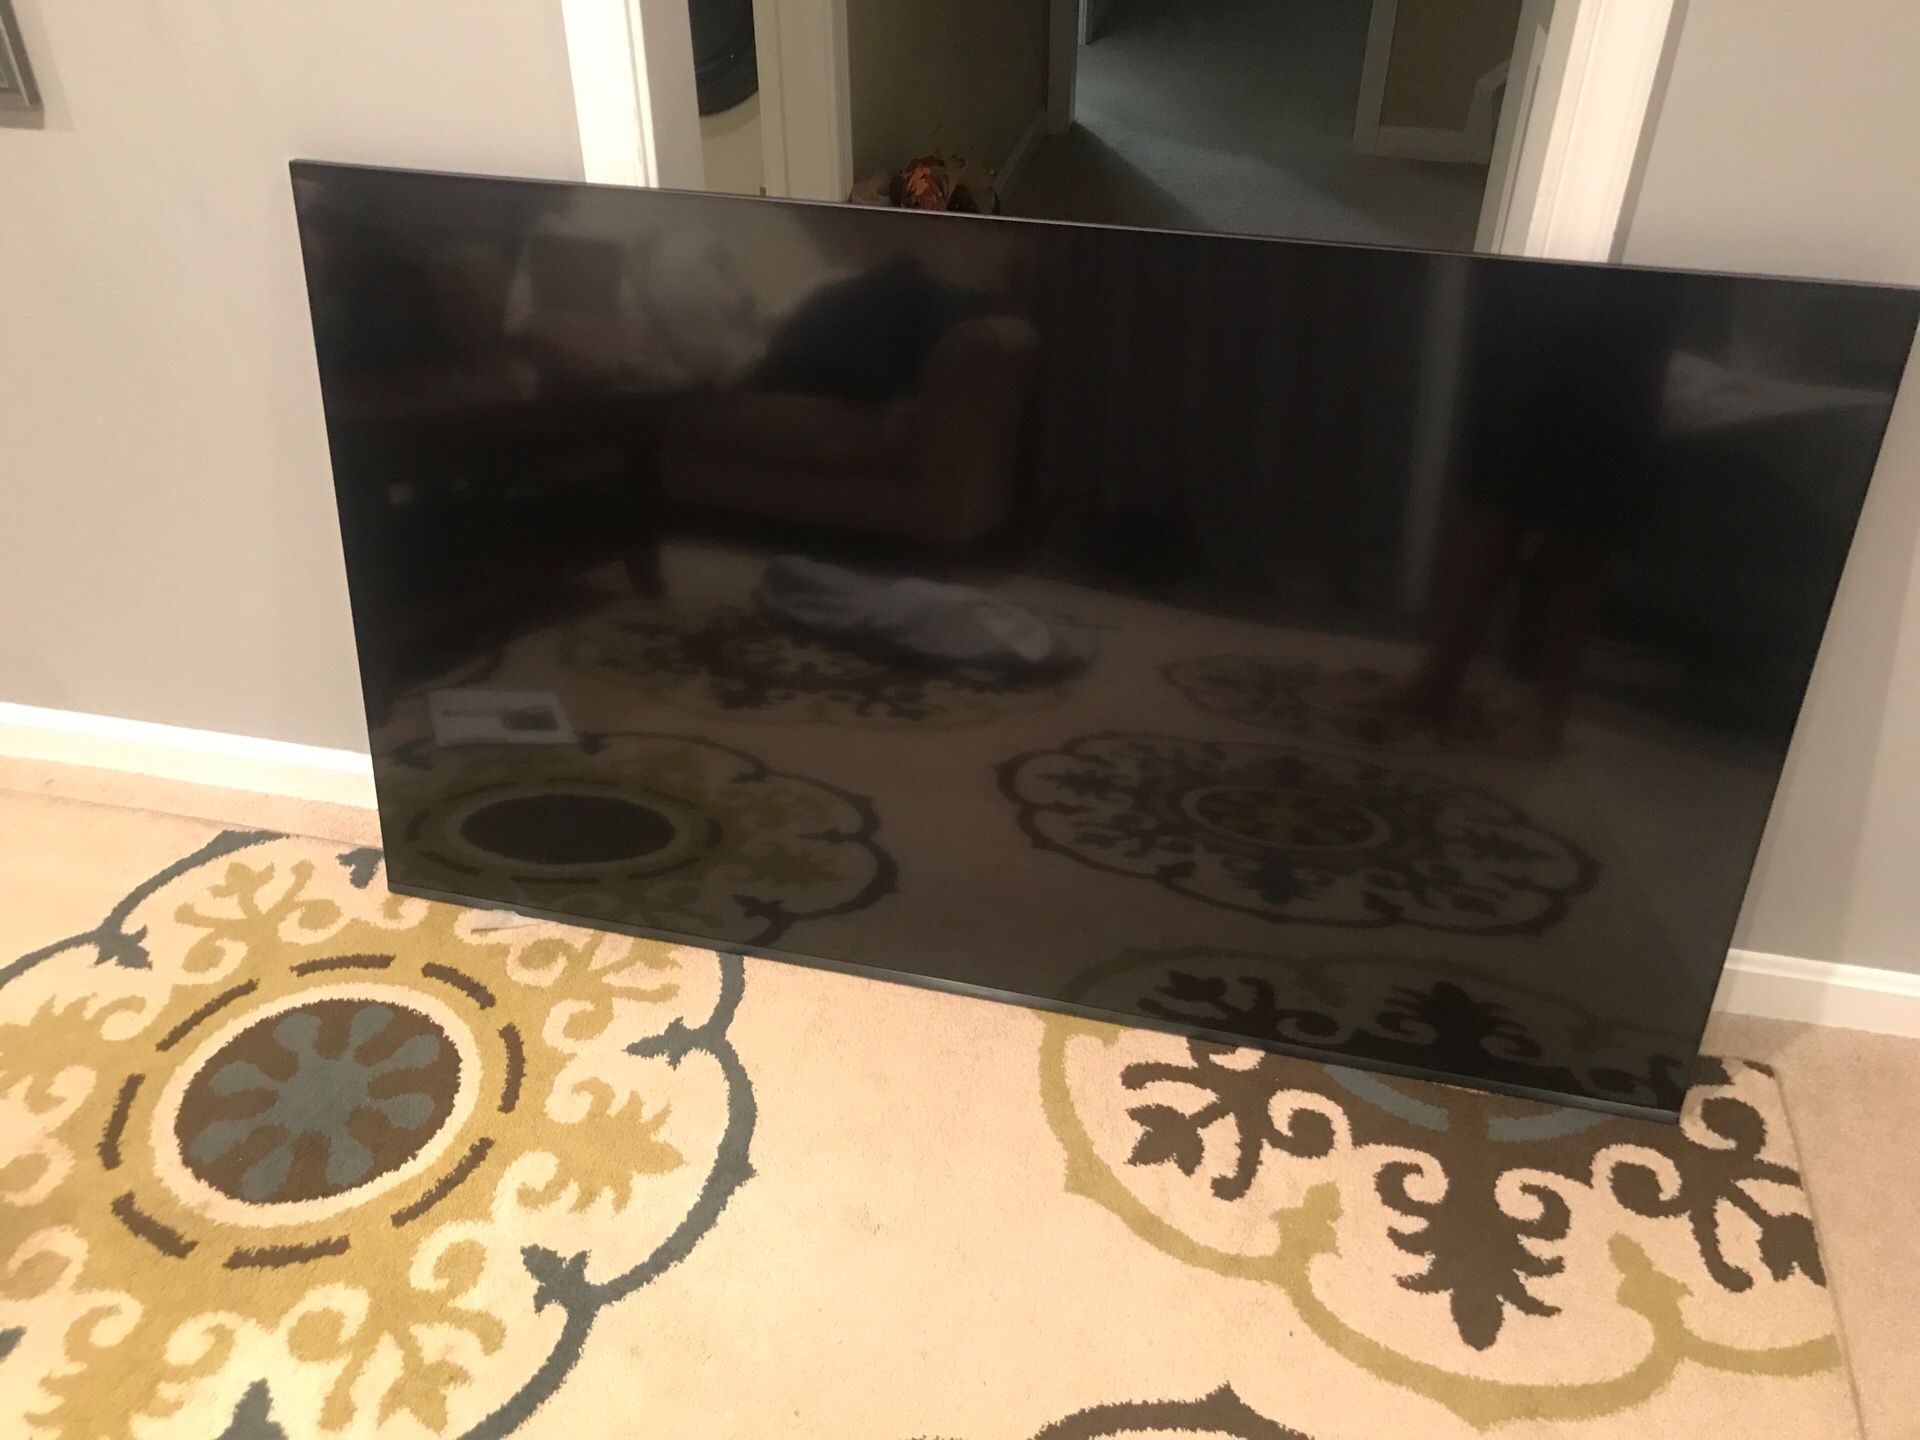 Samsung 8 series 65” tv screen (parts only)